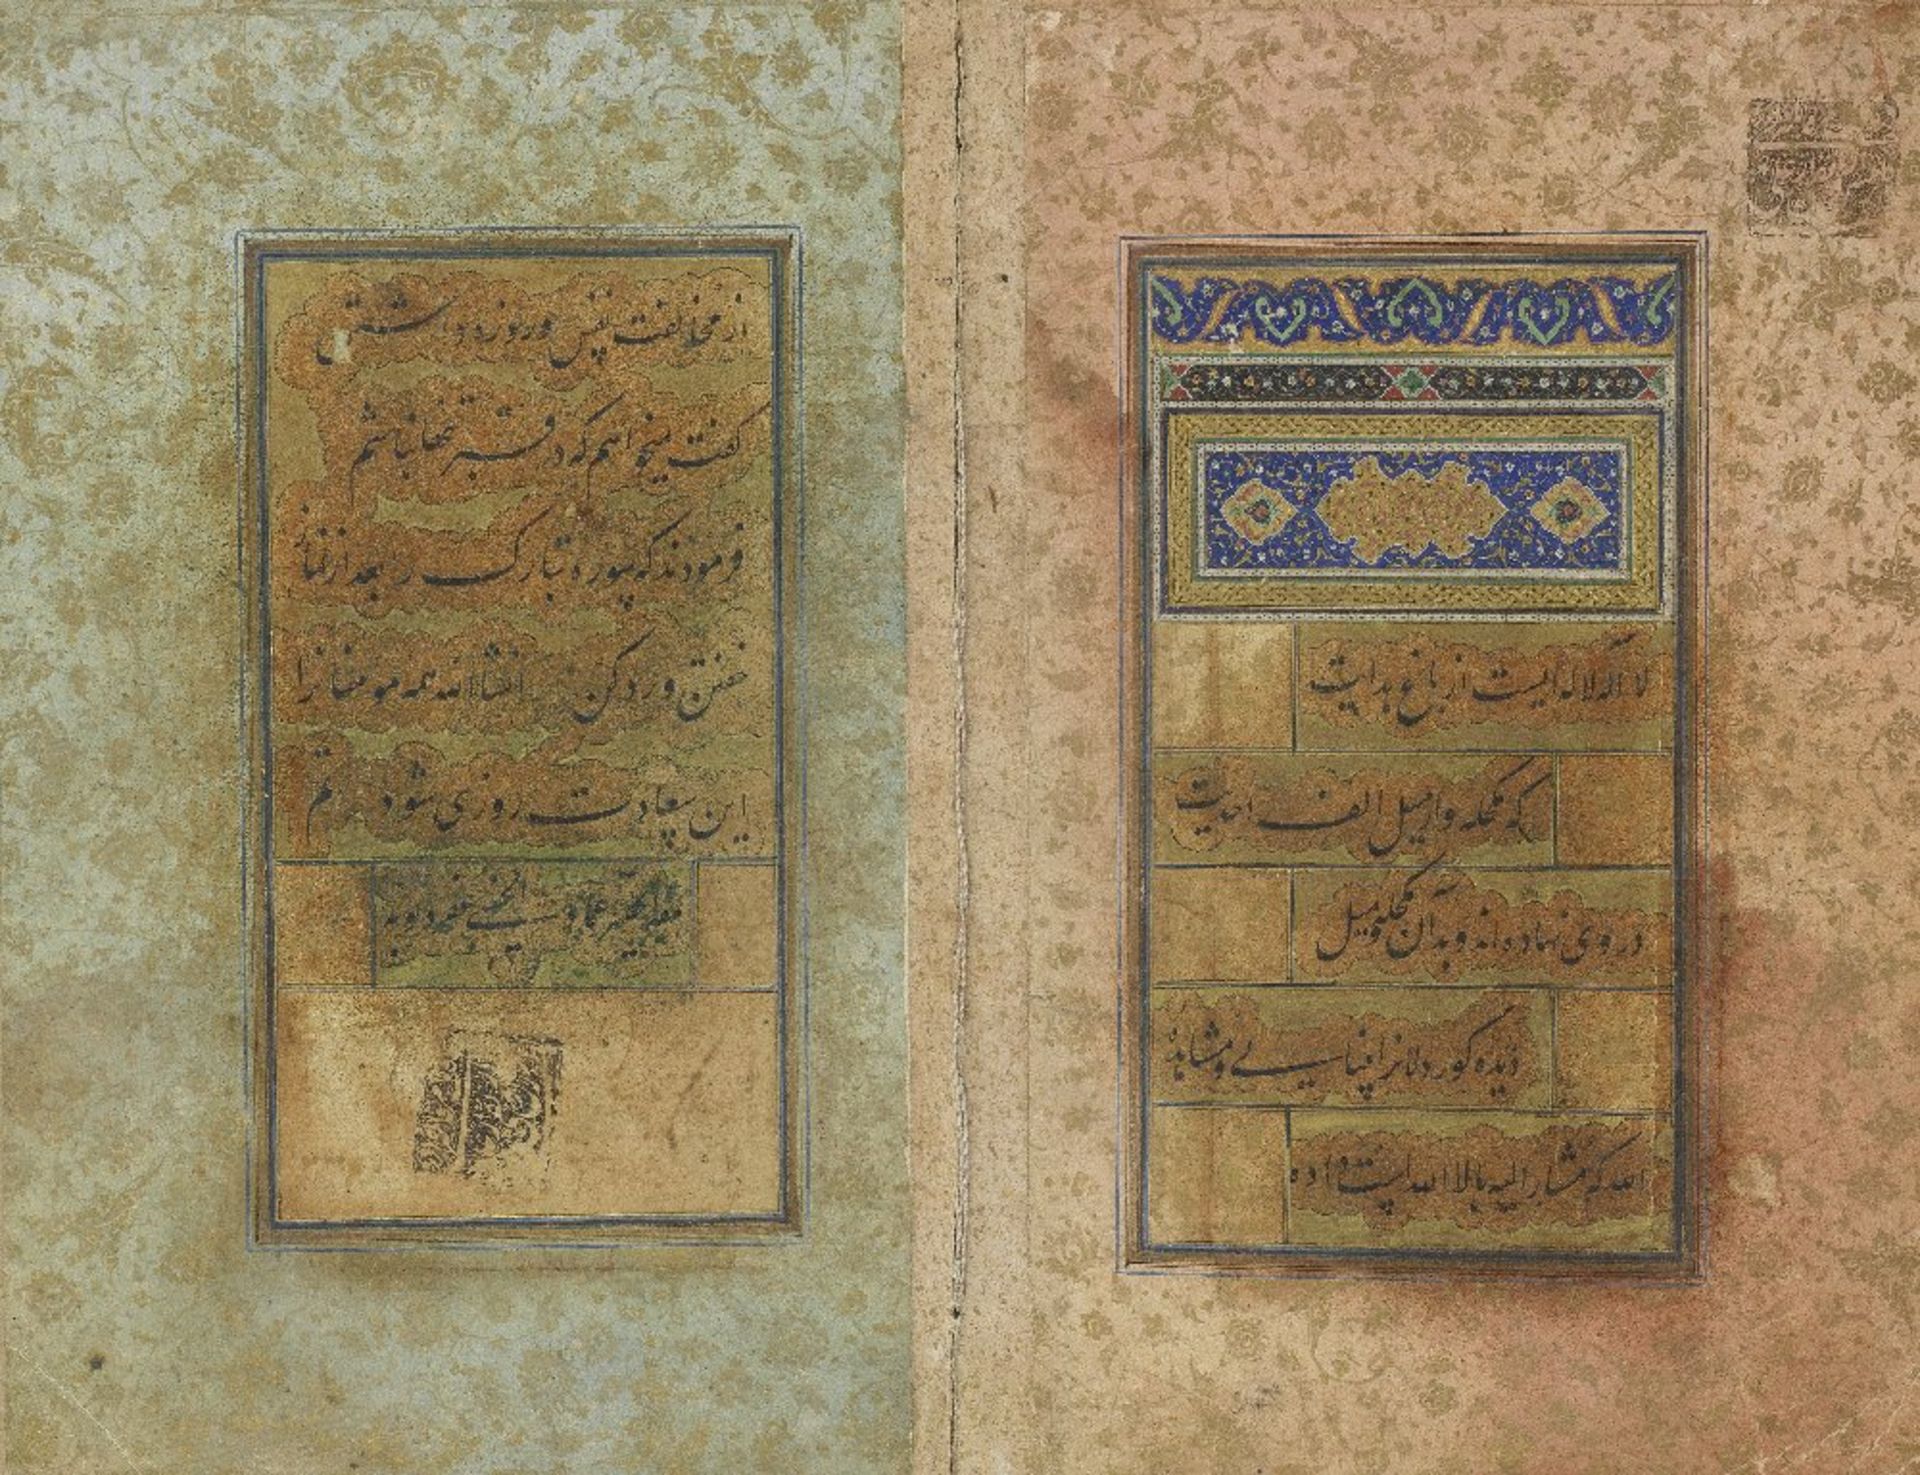 A double-page, consisting of the first and last leaves from an illuminated manuscript of Persian...